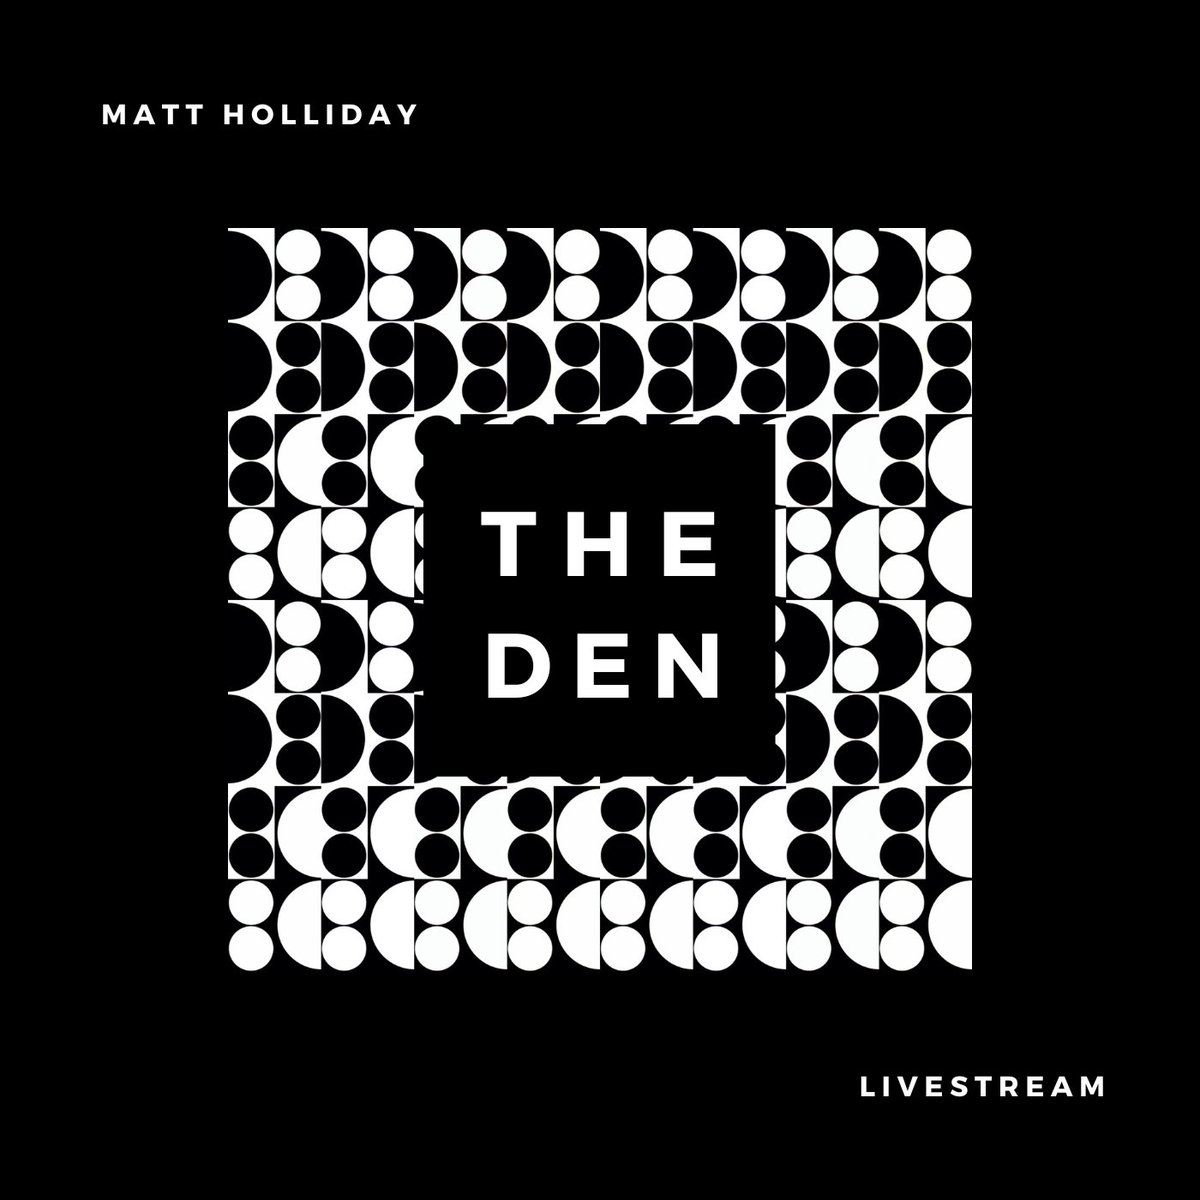 Catch me in the mix Live from The Den on YouTube tonight at 7pm UK time. Link in comments.
#theden #mattholliday #livestream #progressivehouse